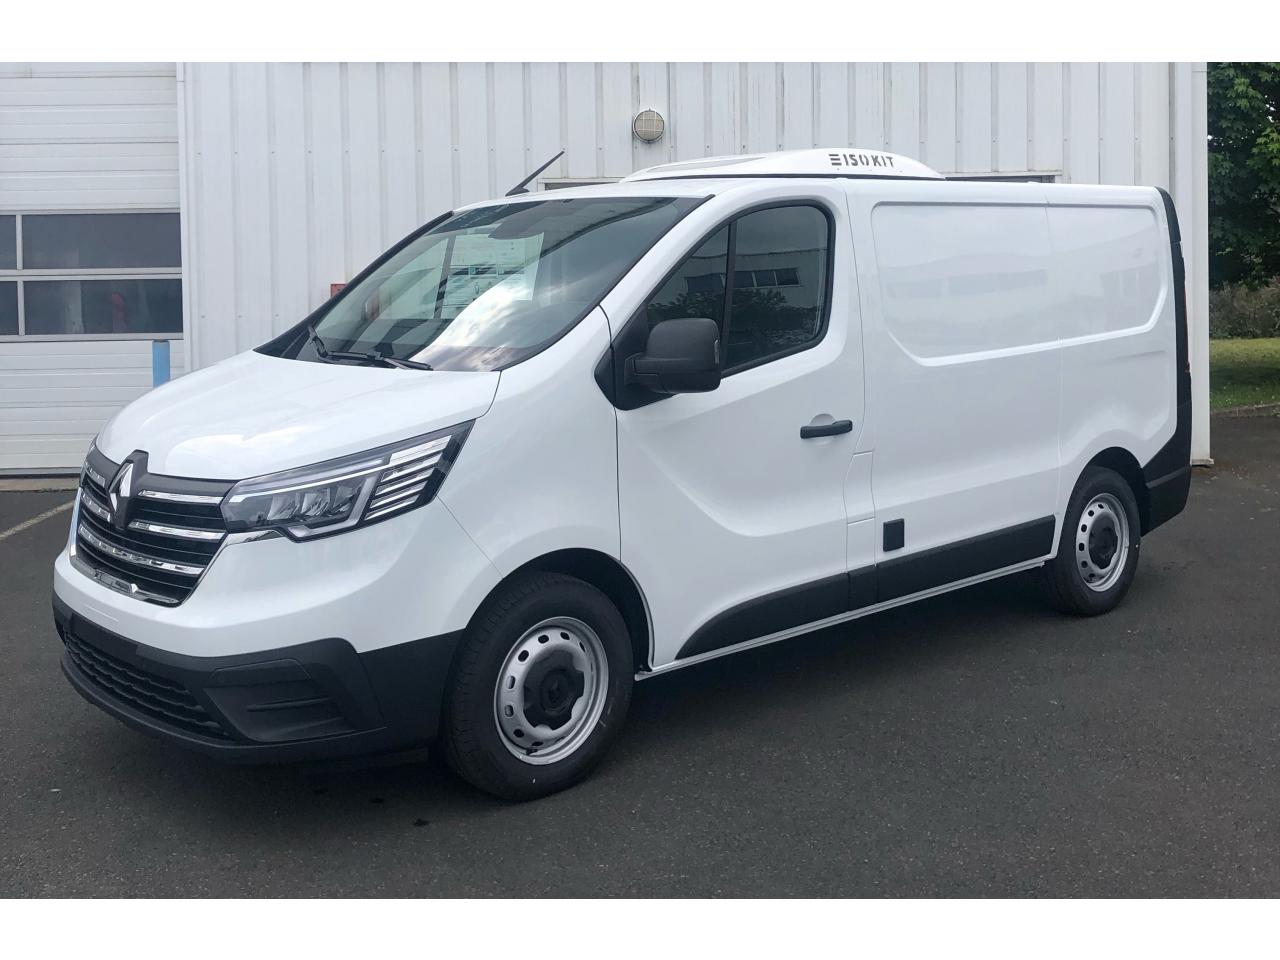 RENAULT-TRAFIC-Trafic L1H1 2800 Kg 2.0 Blue dCi - 130 Euro 6e  III FOURGON Fourgon Grand Confort L1H1 PHASE 3